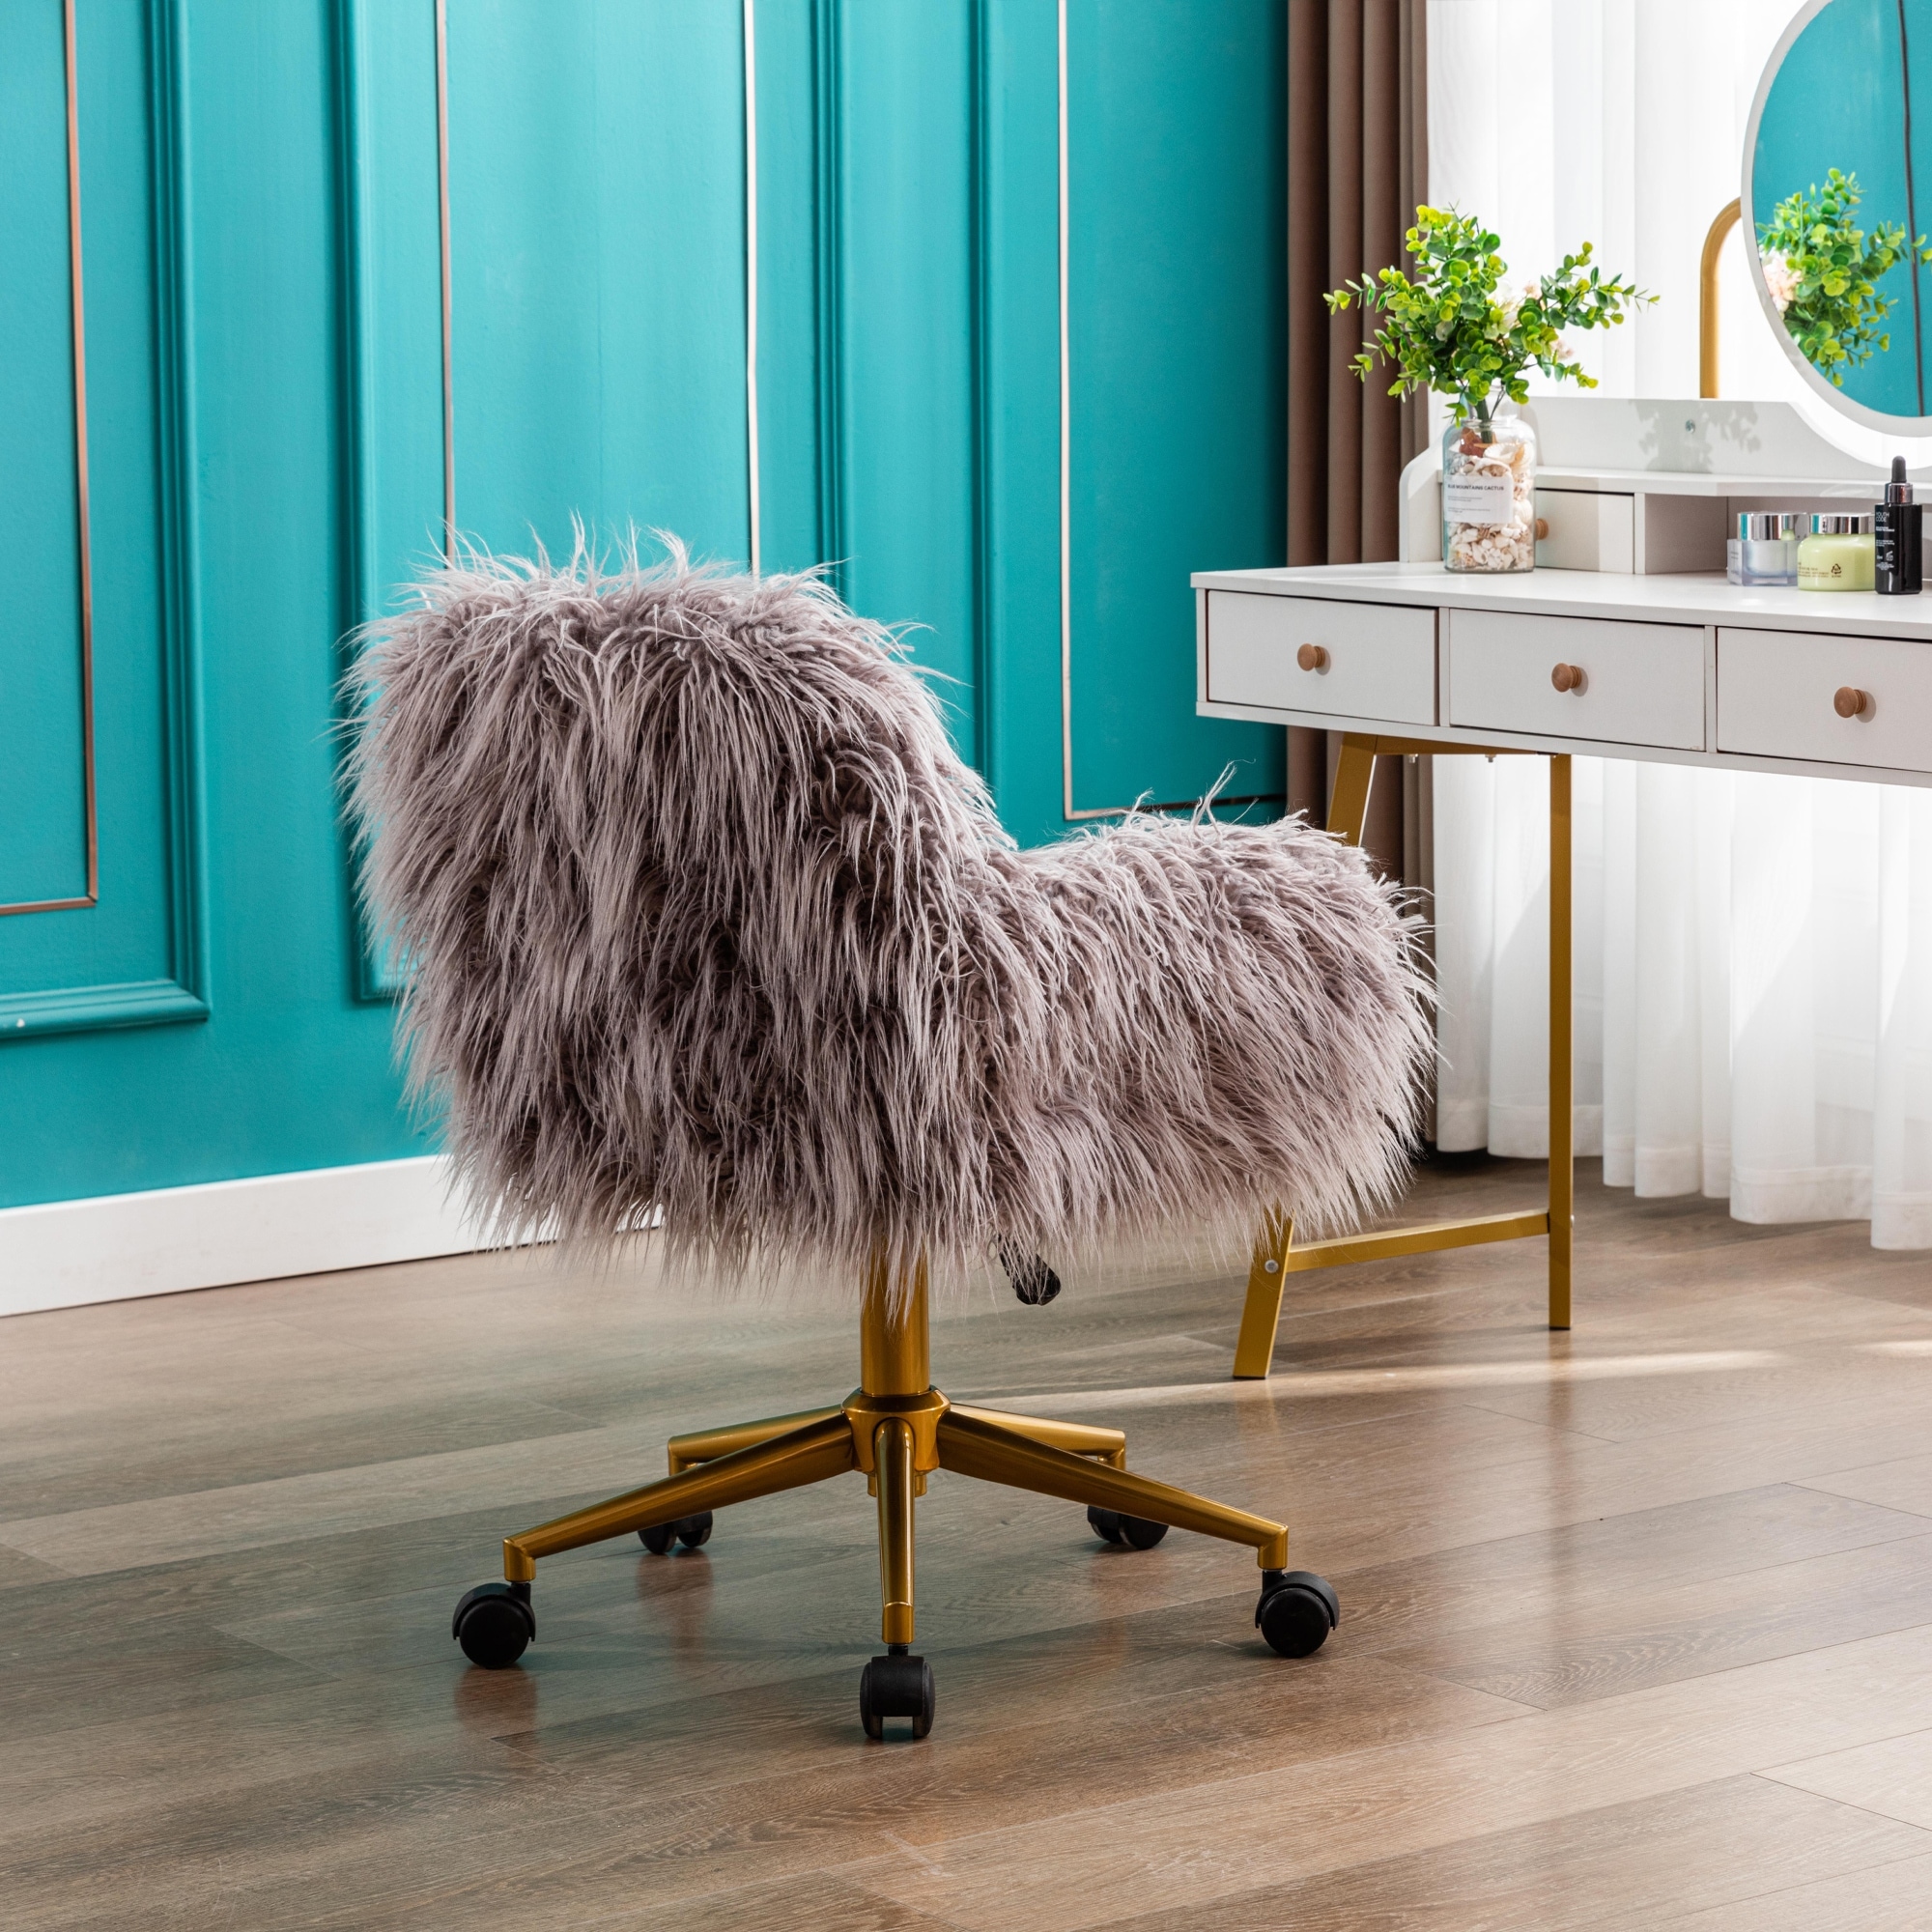 https://ak1.ostkcdn.com/images/products/is/images/direct/4dbb4ff7e309557271be1897d0a8a072127d9e98/Modern-Fake-fur-home-office-chair%2C-fluffy-chair-for-girls%2C-makeup-vanity-Chair-with-Gold---Silver-Plating-Base.jpg